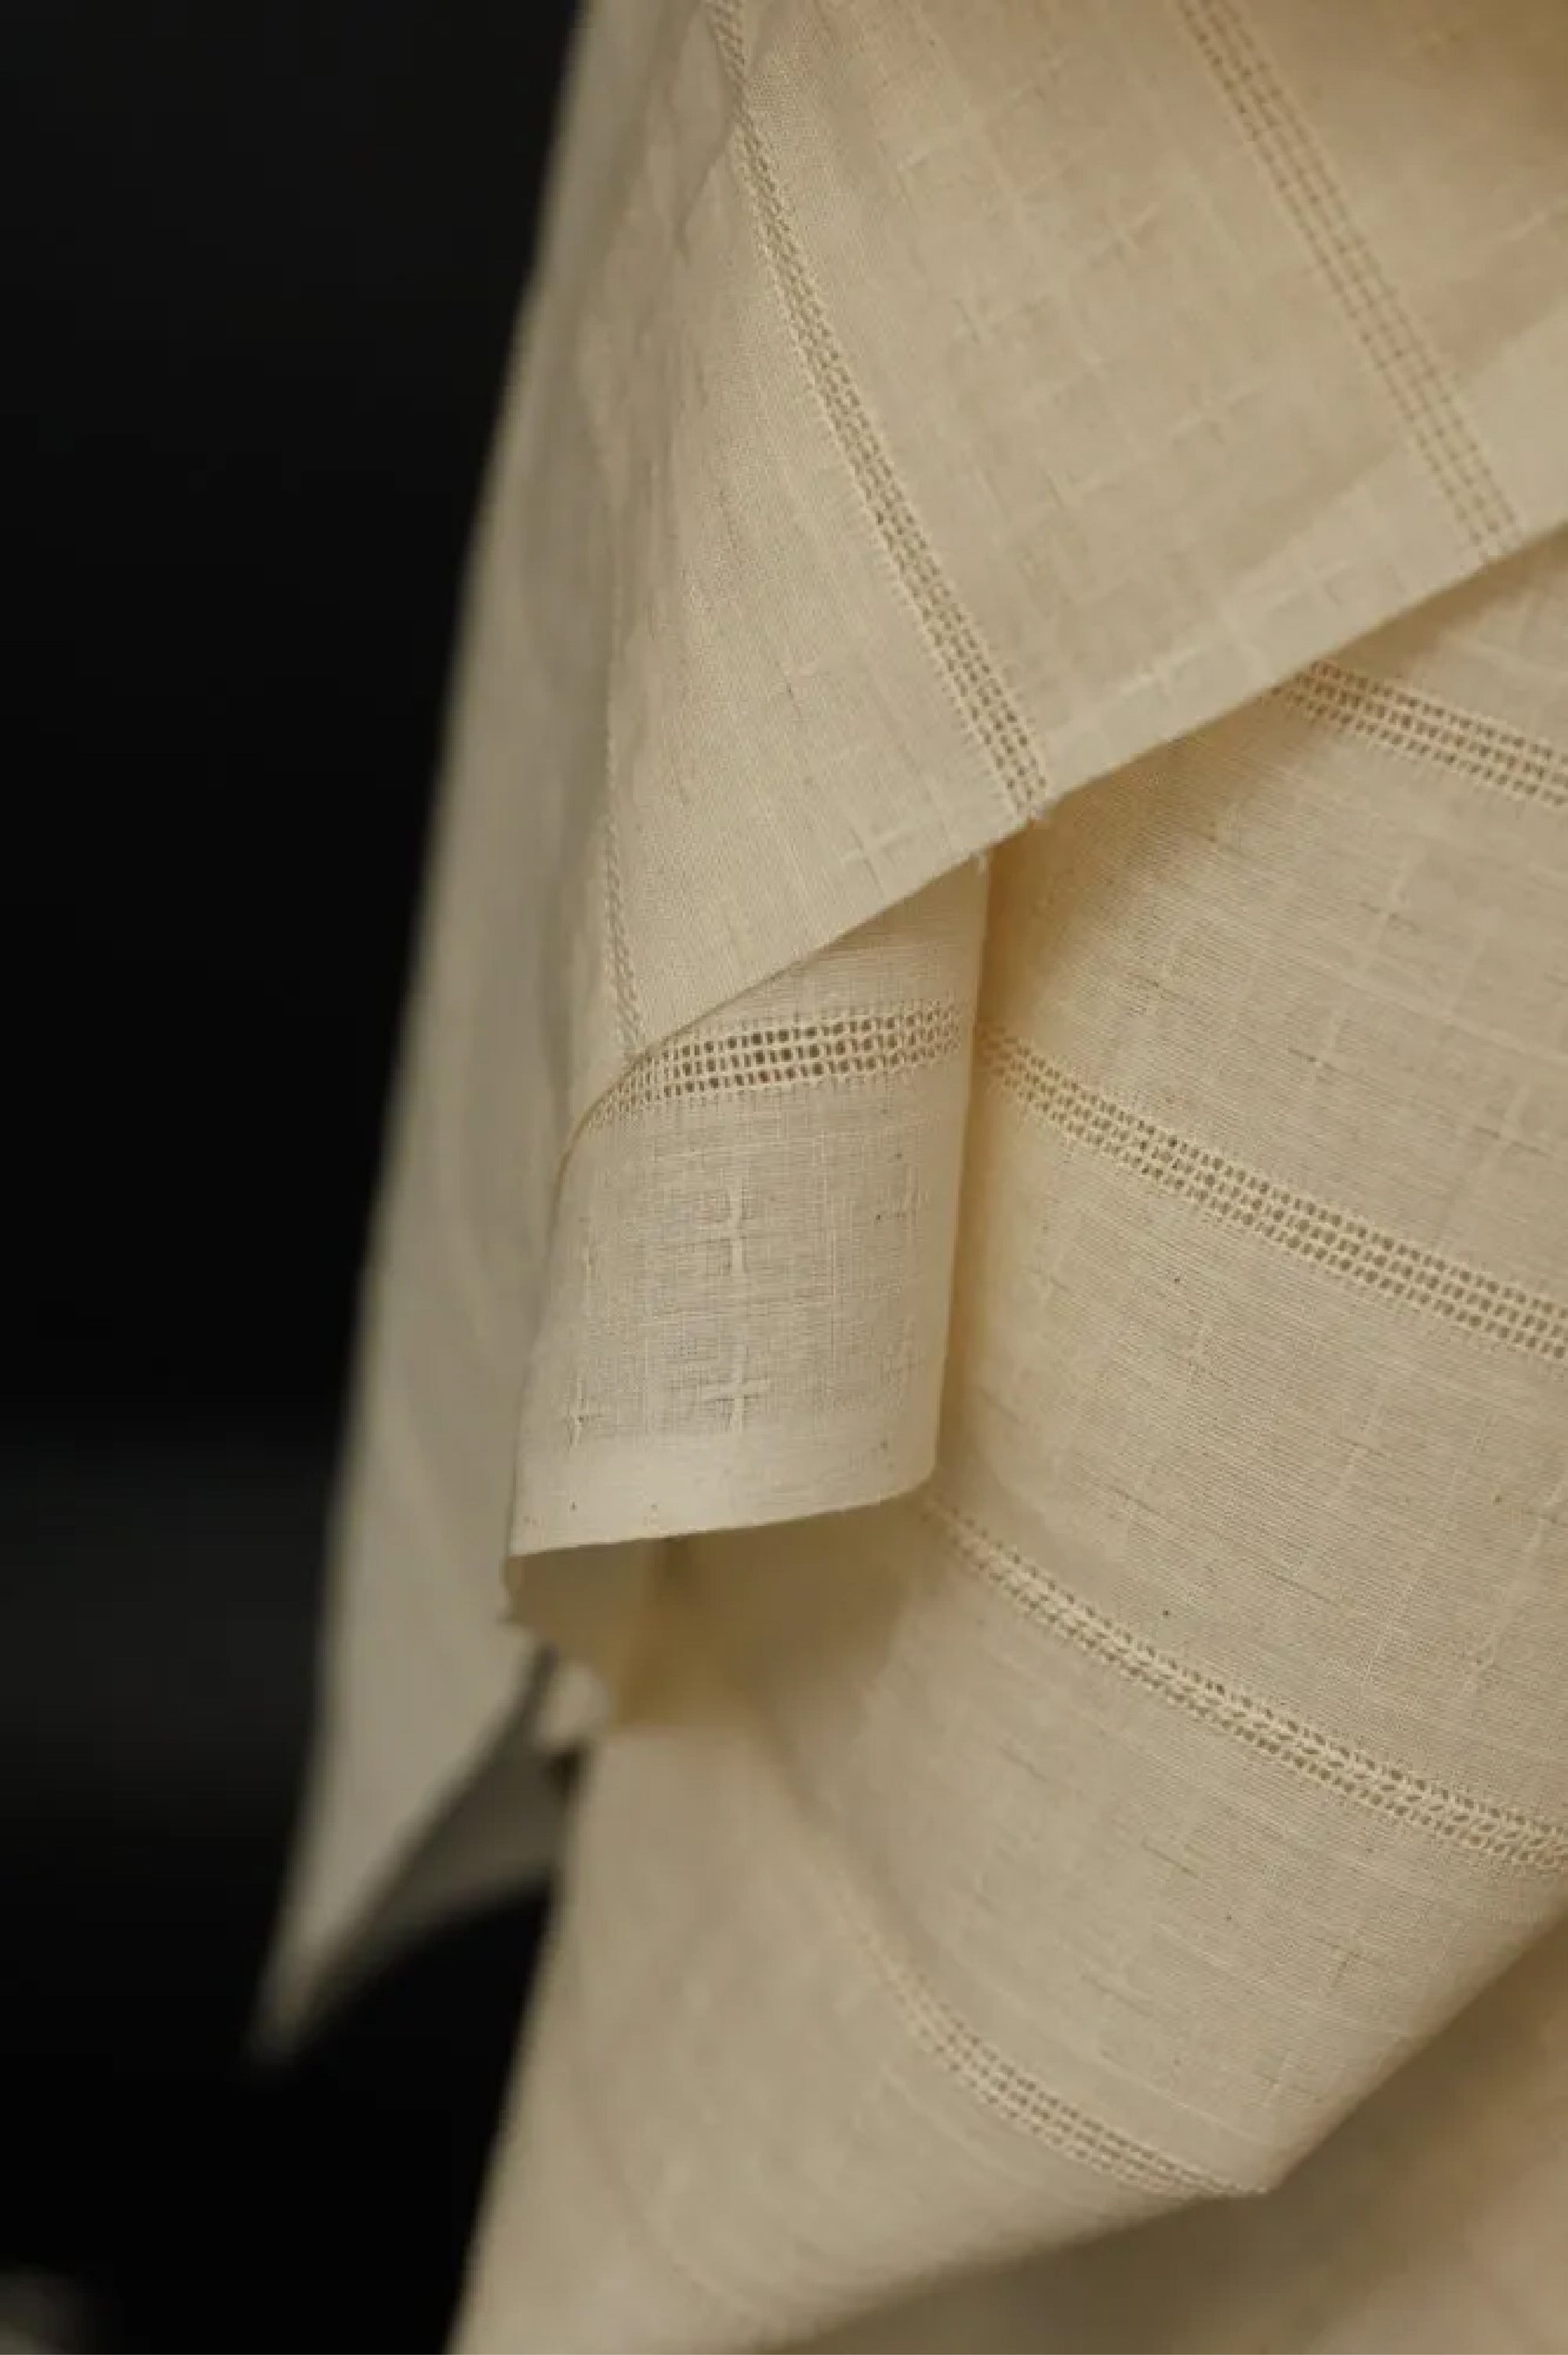 A close up of a draped Indian Cotton beige fabric that is lightweight and semi sheer. The pattern consists of vertical eyelet weaves and woven crosses on a black background.